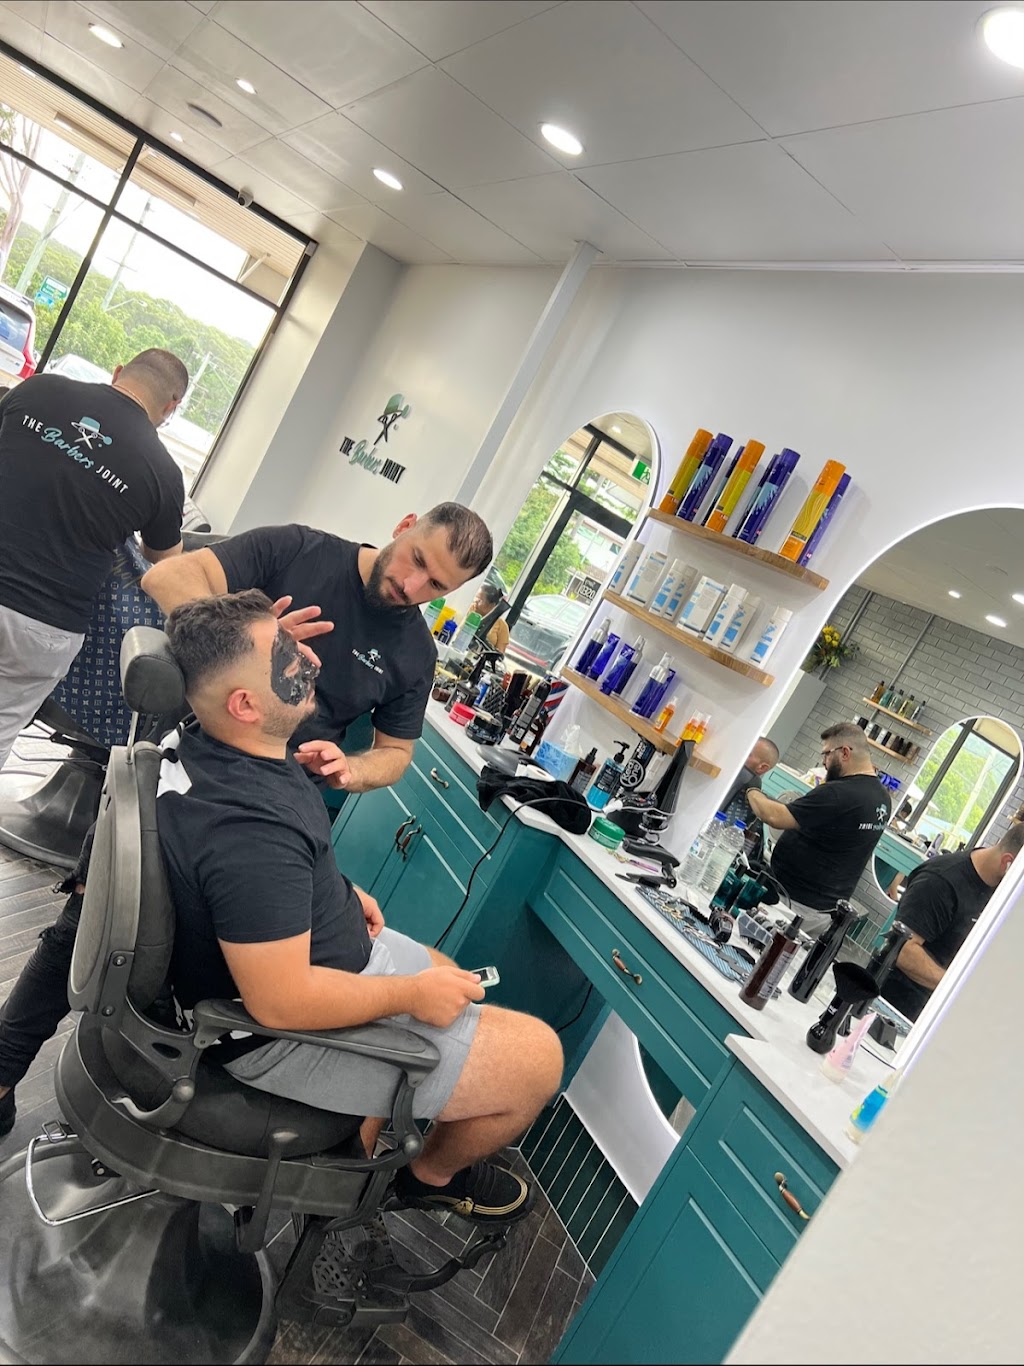 The Barbers Joint | hair care | 3/1 Park Rd, Wallacia NSW 2745, Australia | 0247739095 OR +61 2 4773 9095